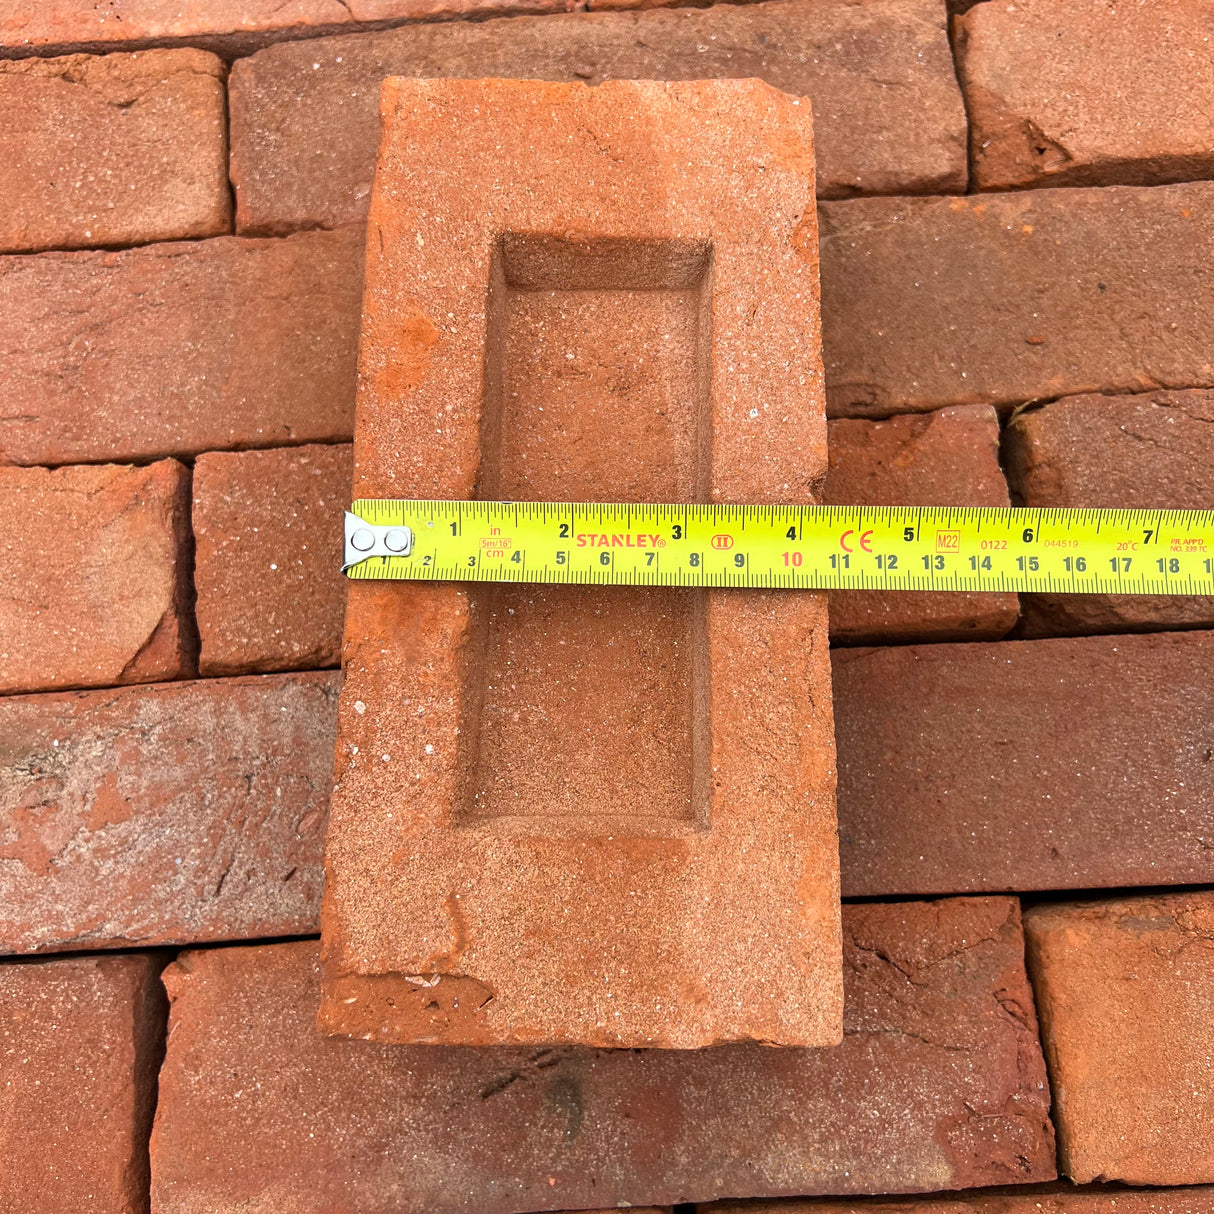 Reclamation 68mm Premium Soft Red Rubber Handmade Brick | Pack of 300 | Free Delivery - Reclaimed Brick Company